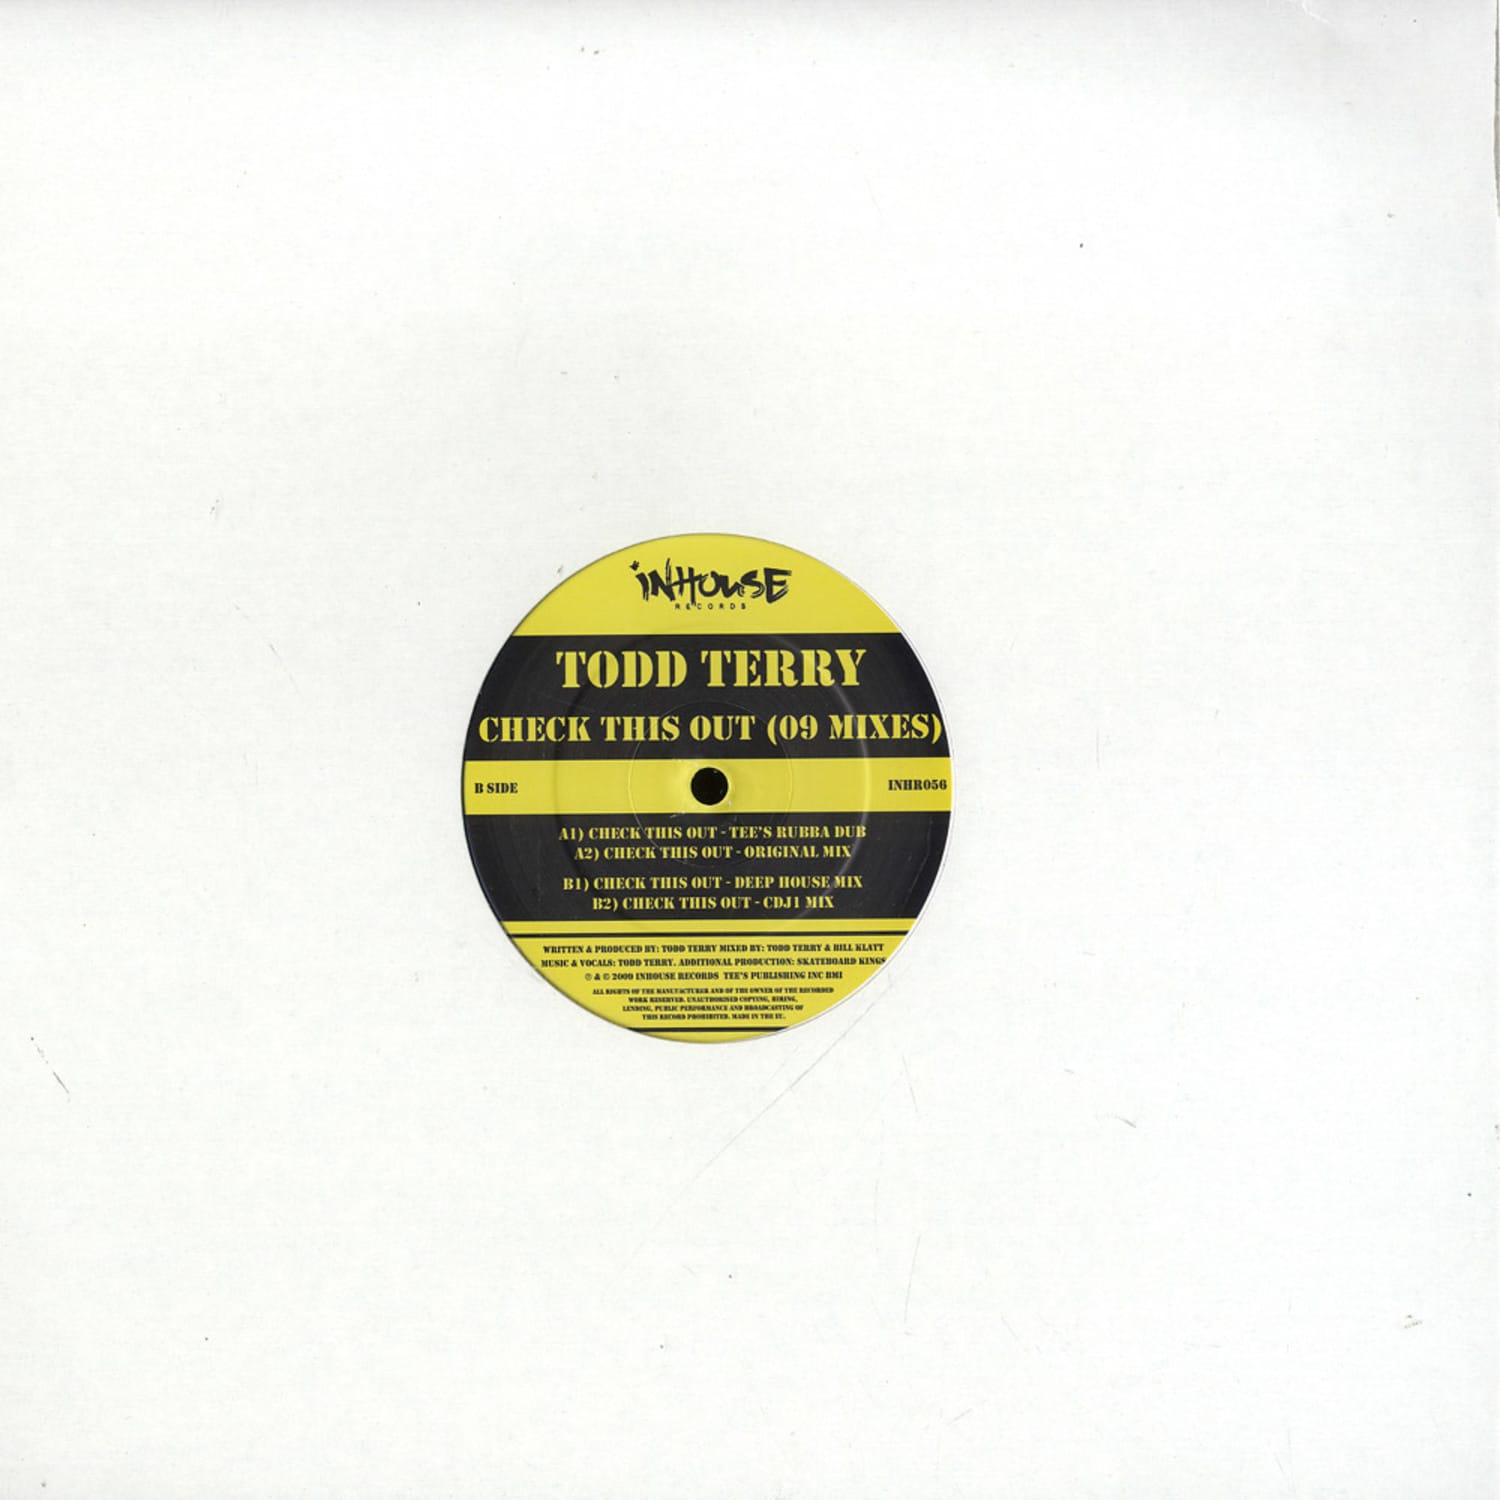 Todd Terry - CHECK THIS OUT 09